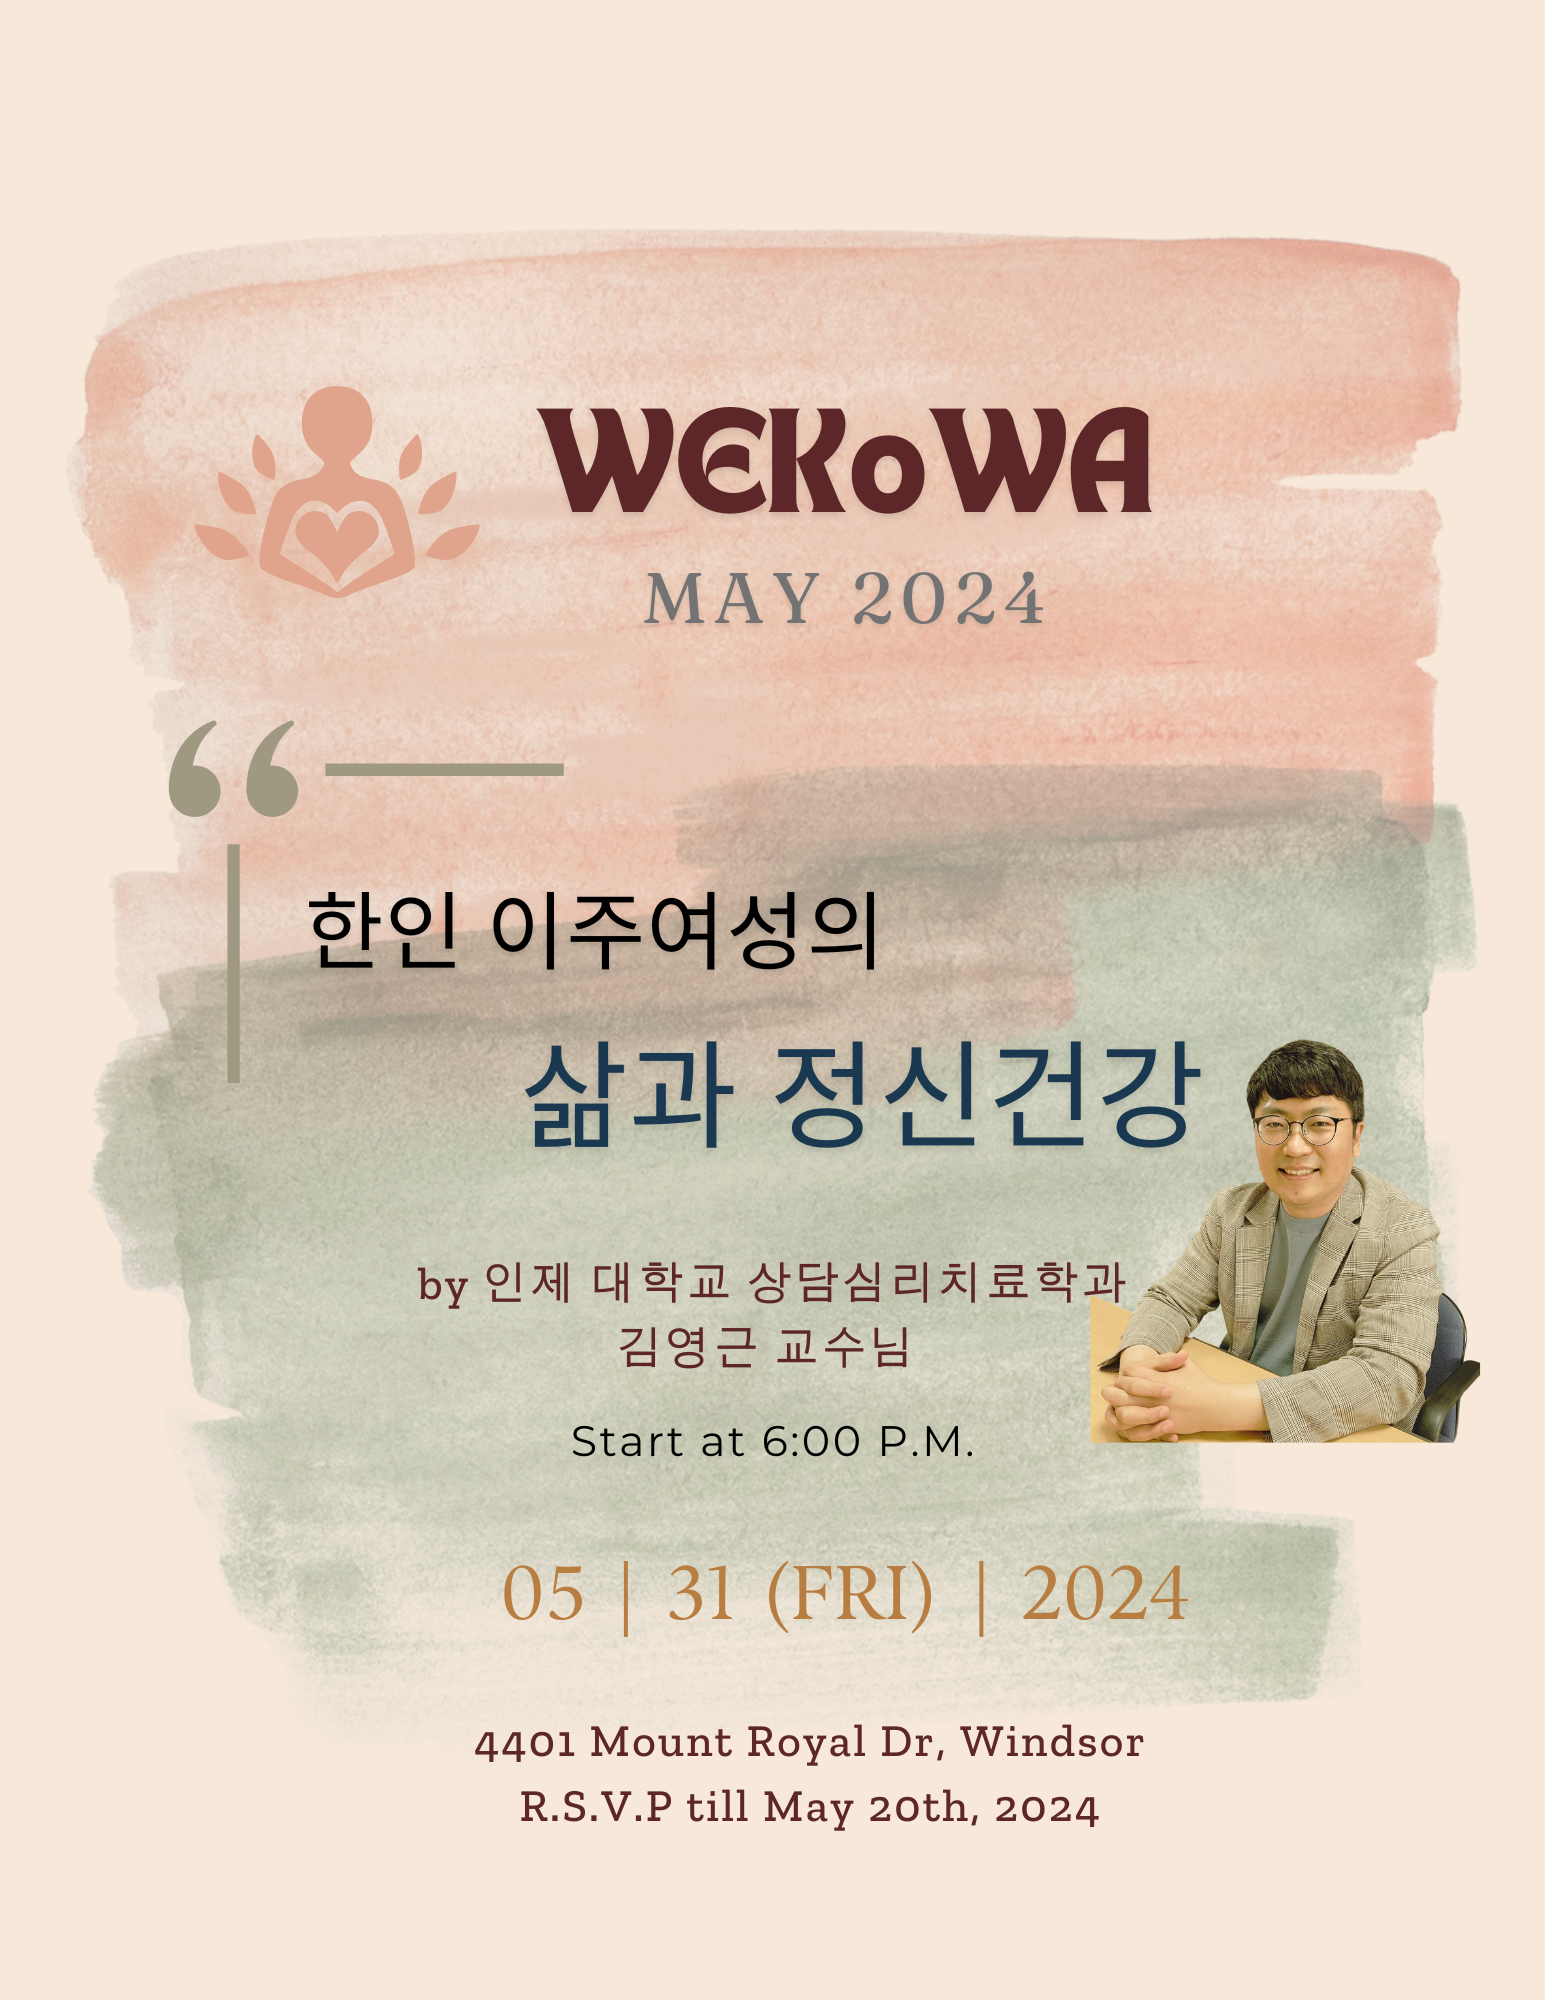 Korean immigrant women's lives and mental health event poster